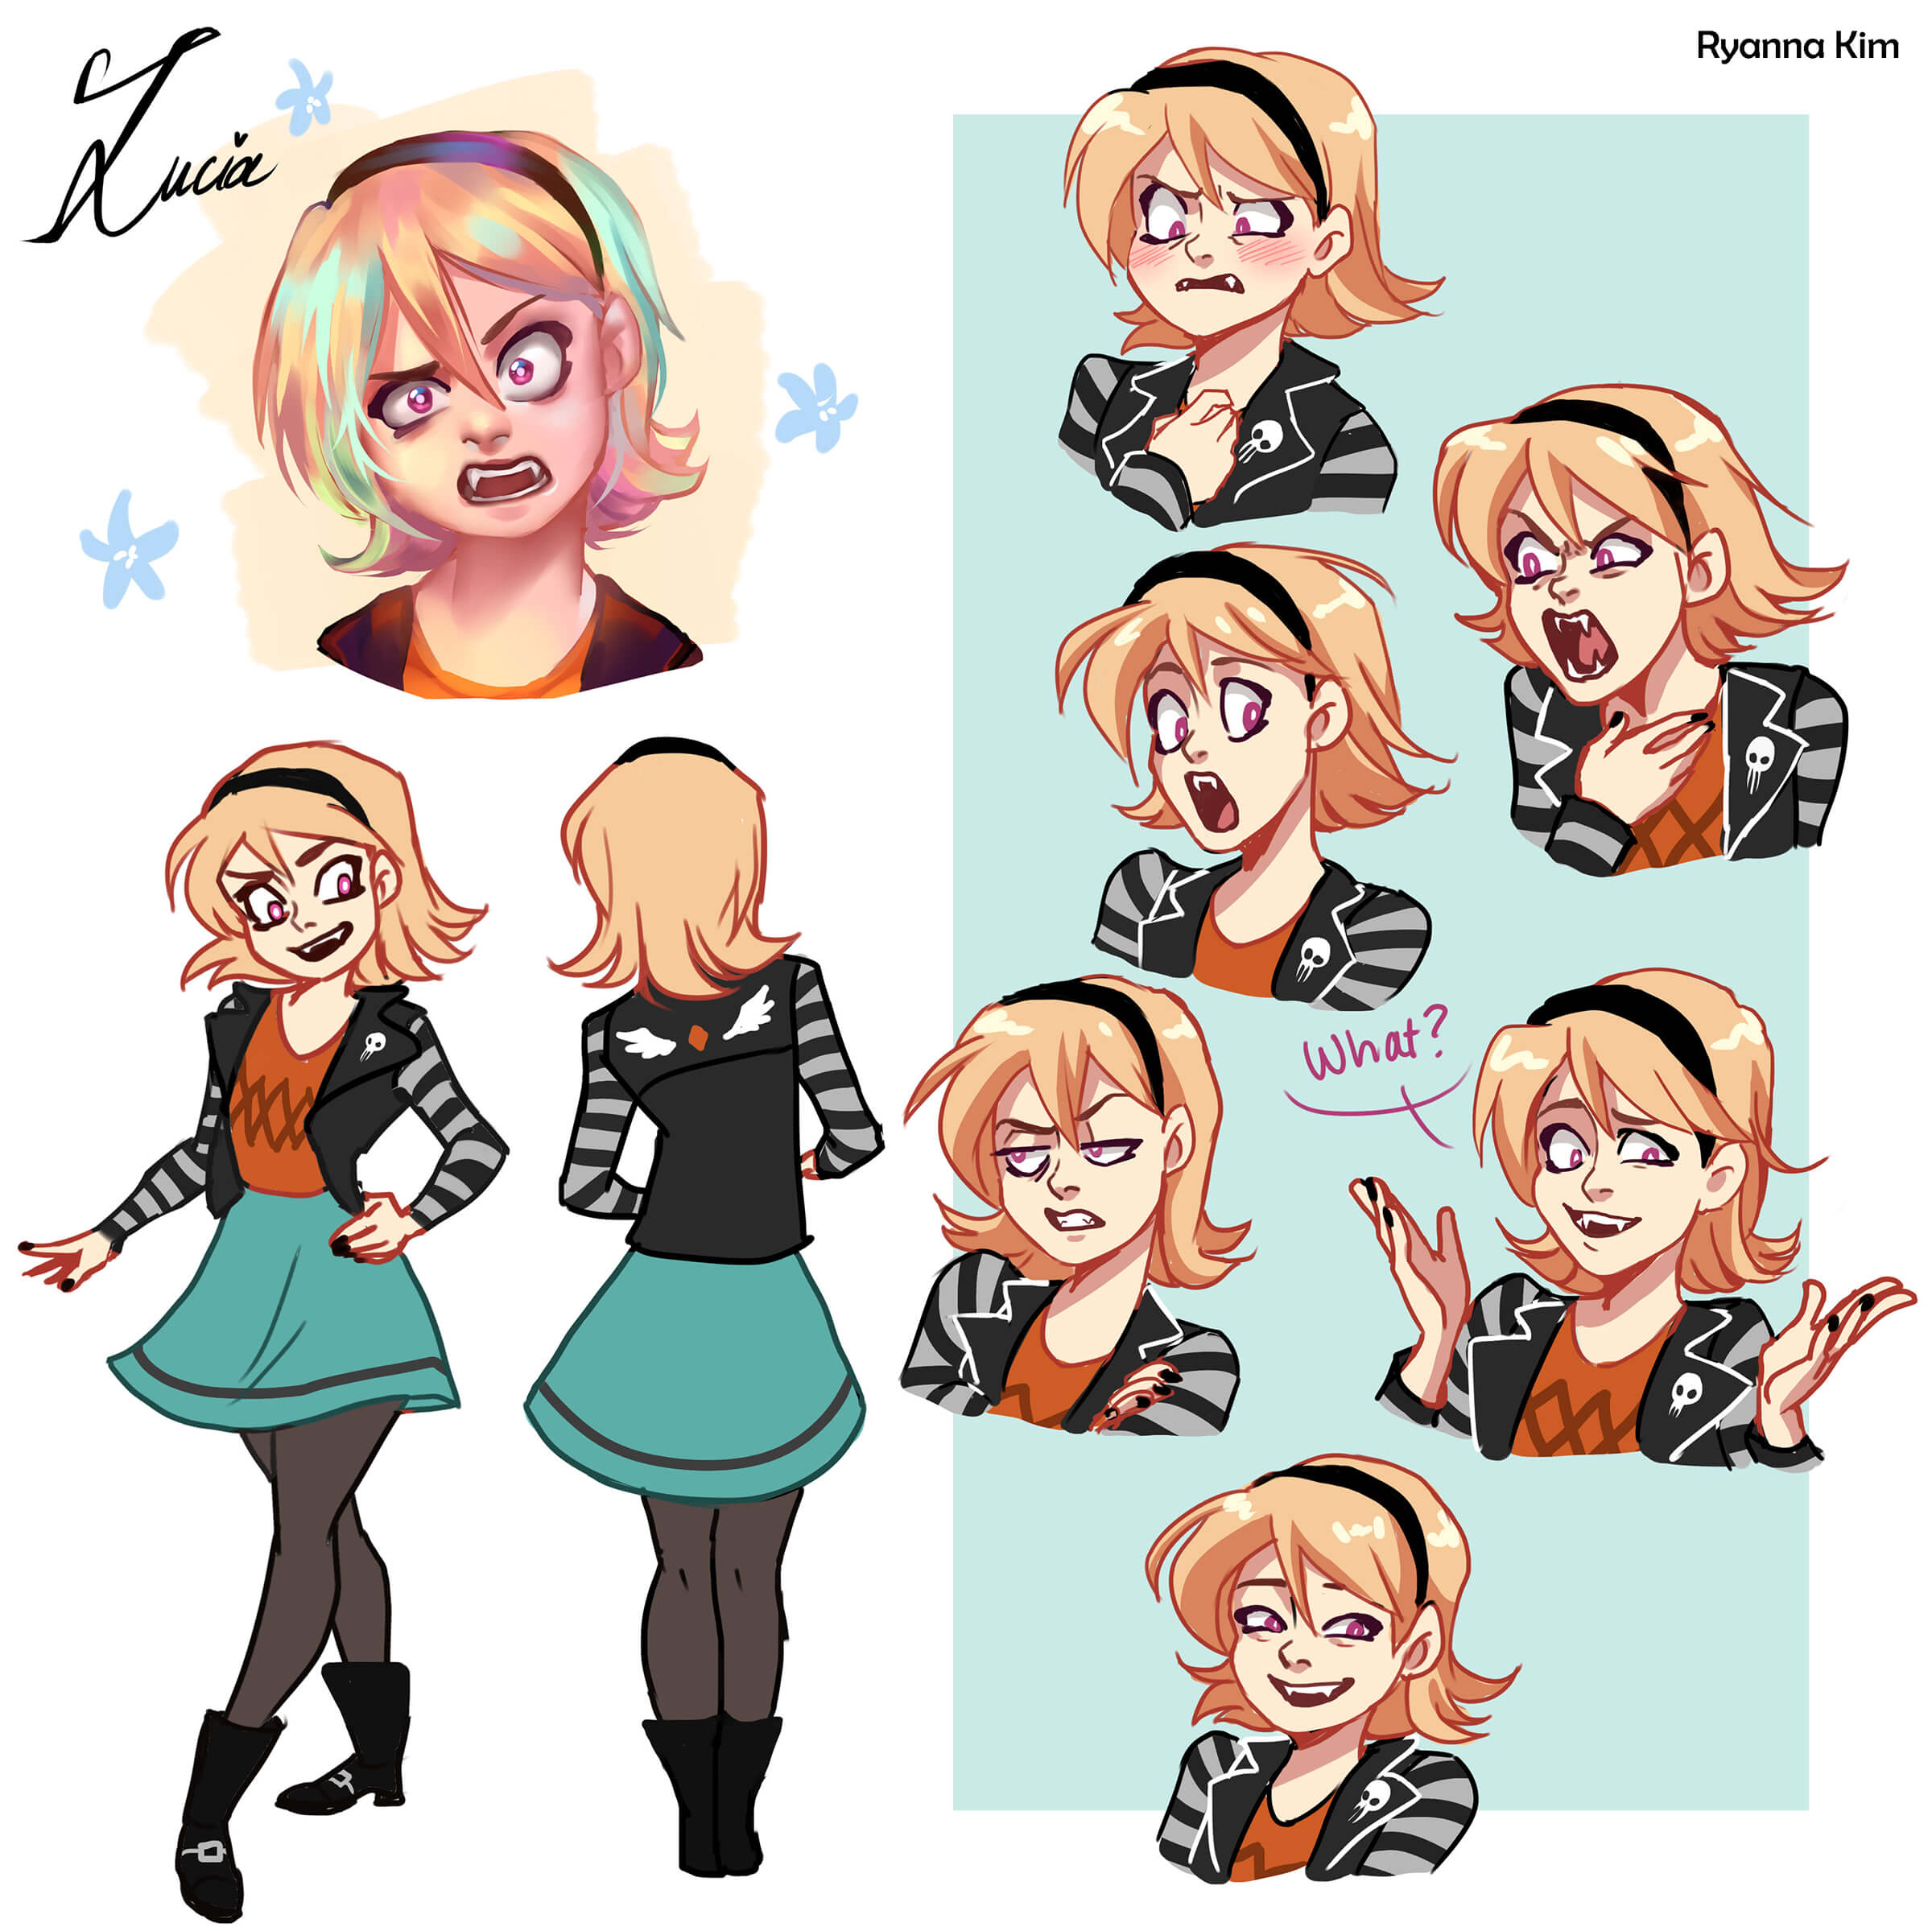 Various expressions of a teenage vampire character named Lucia